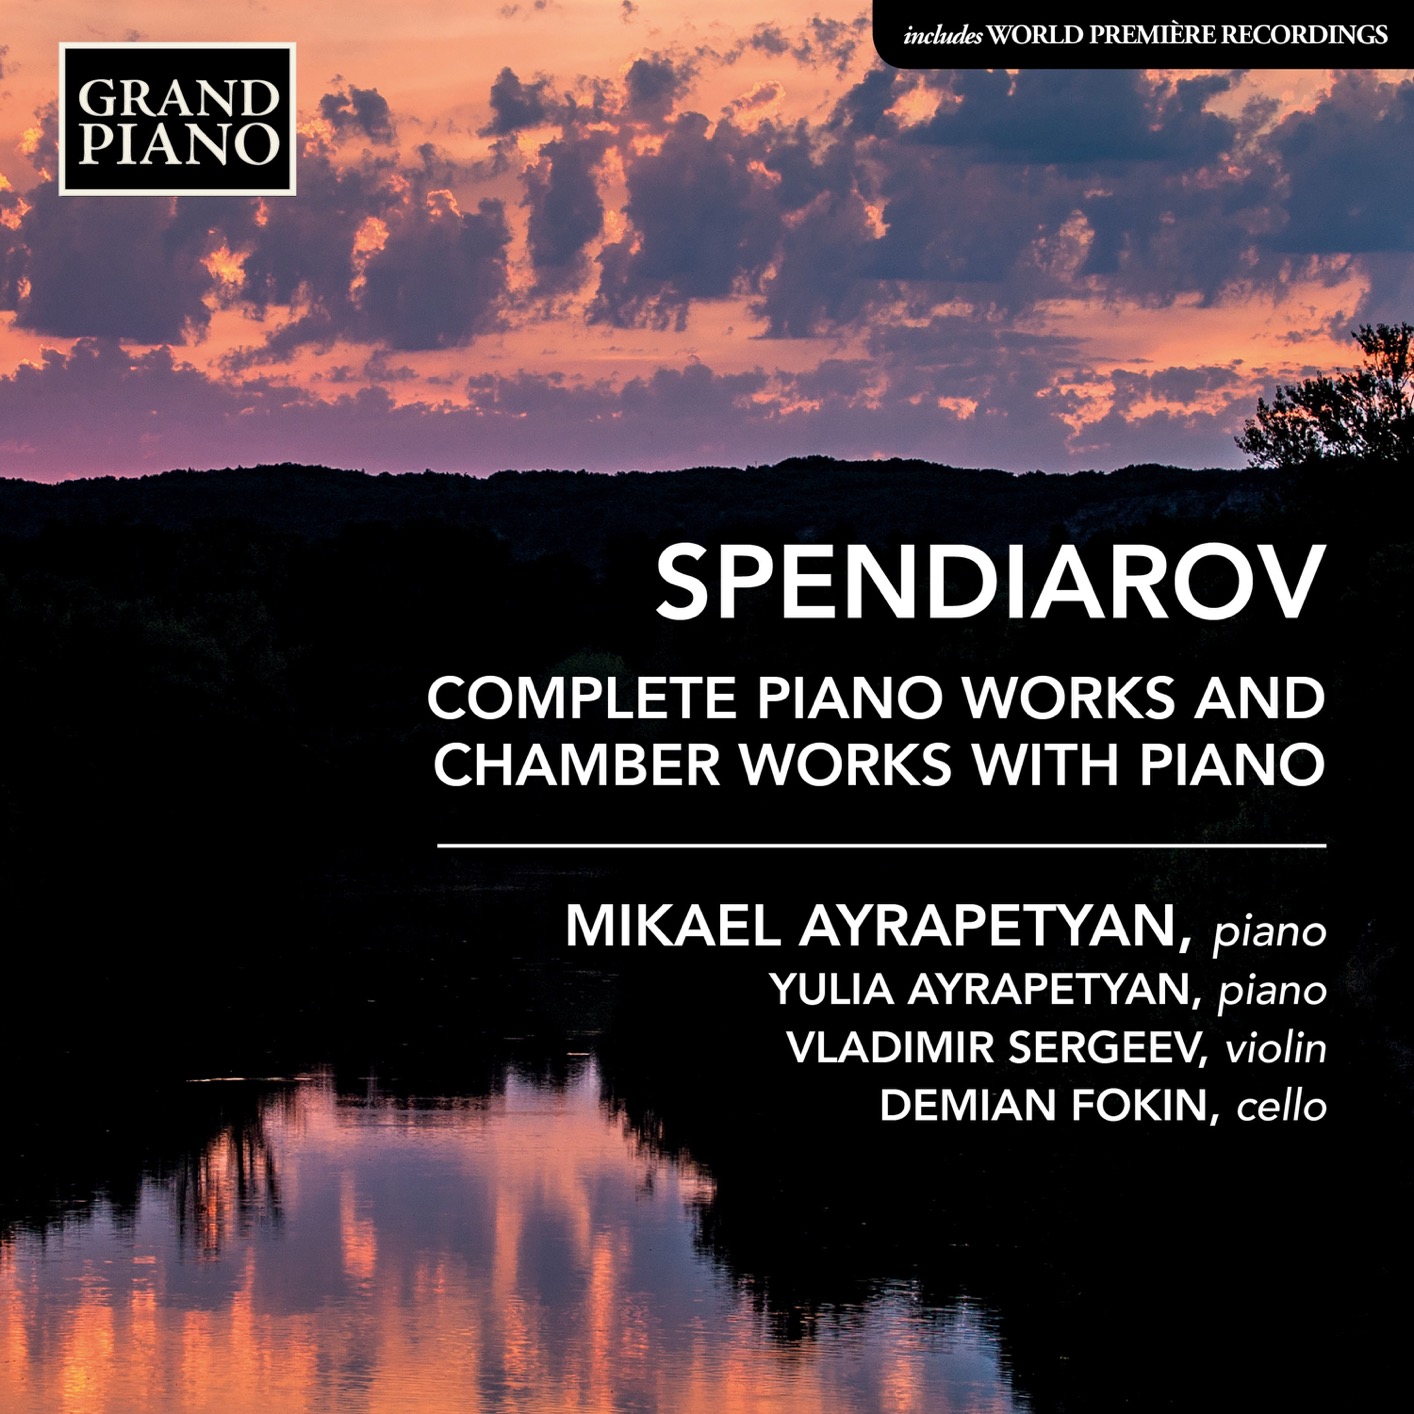 Mikael Ayrapetyan - Spendiarov - Complete Piano Works & Chamber Works with Piano (2021) [FLAC 24bit/48kHz]